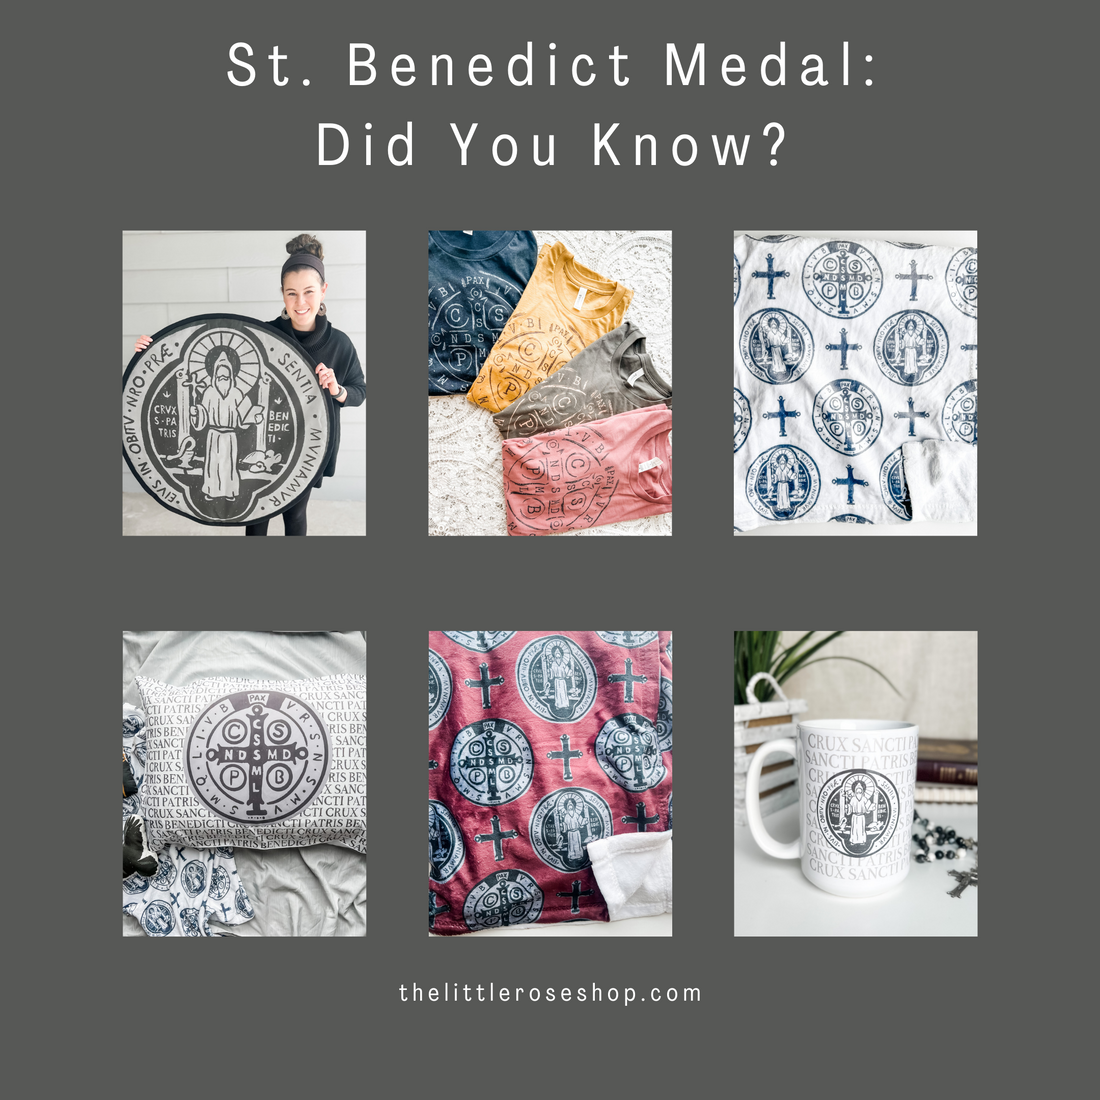 St. Benedict Medal: Did You Know?